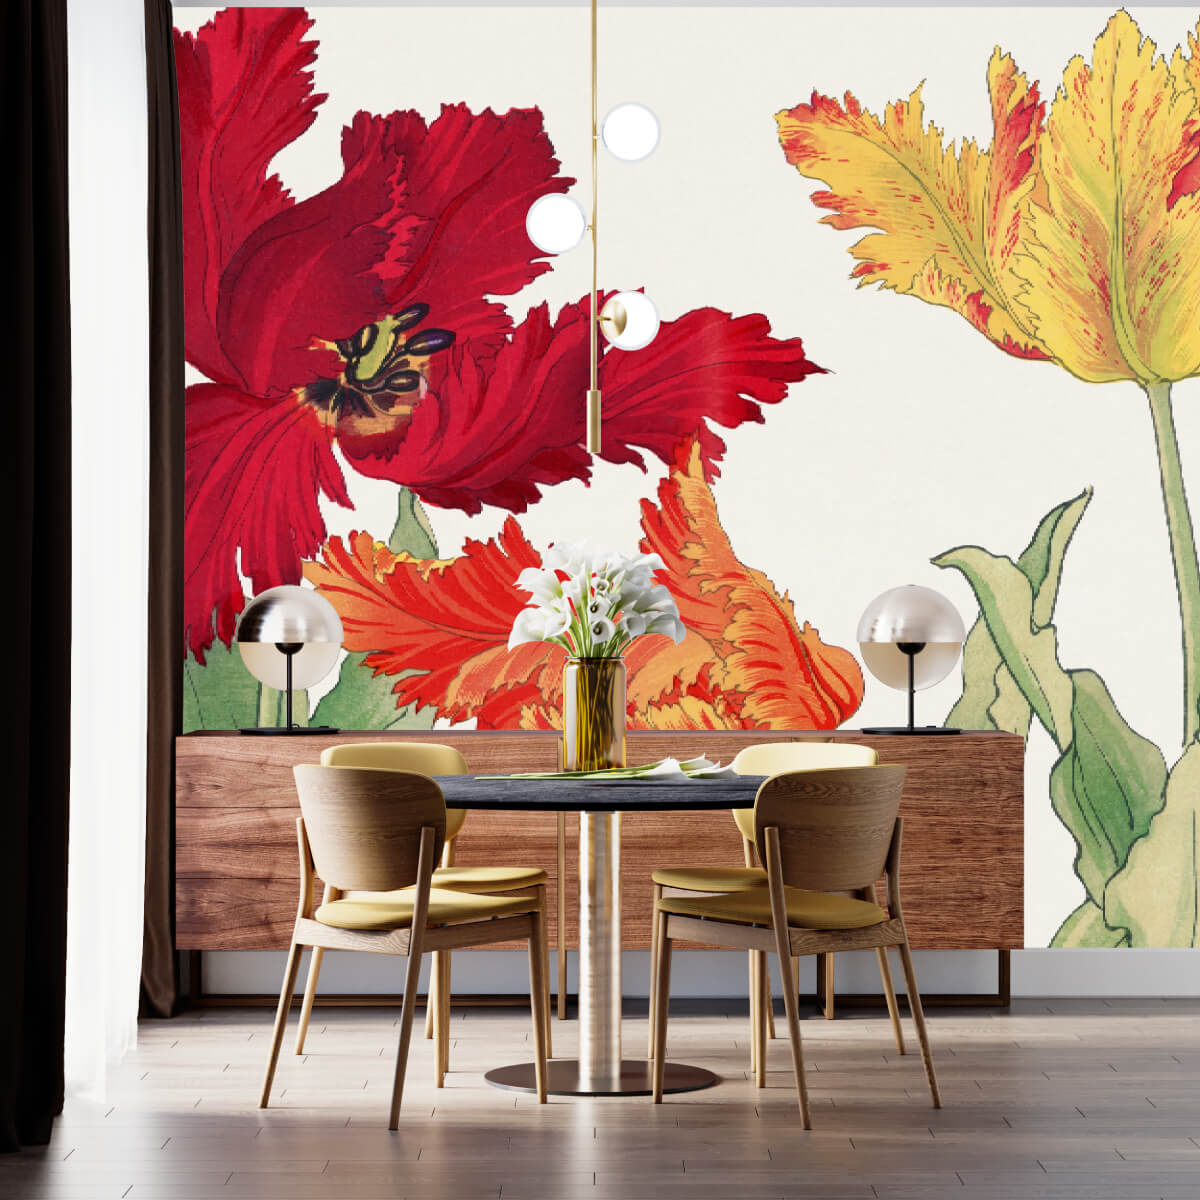 Red and Yellow Parrot Tulips Floral Mural Wallpaper (SqM)